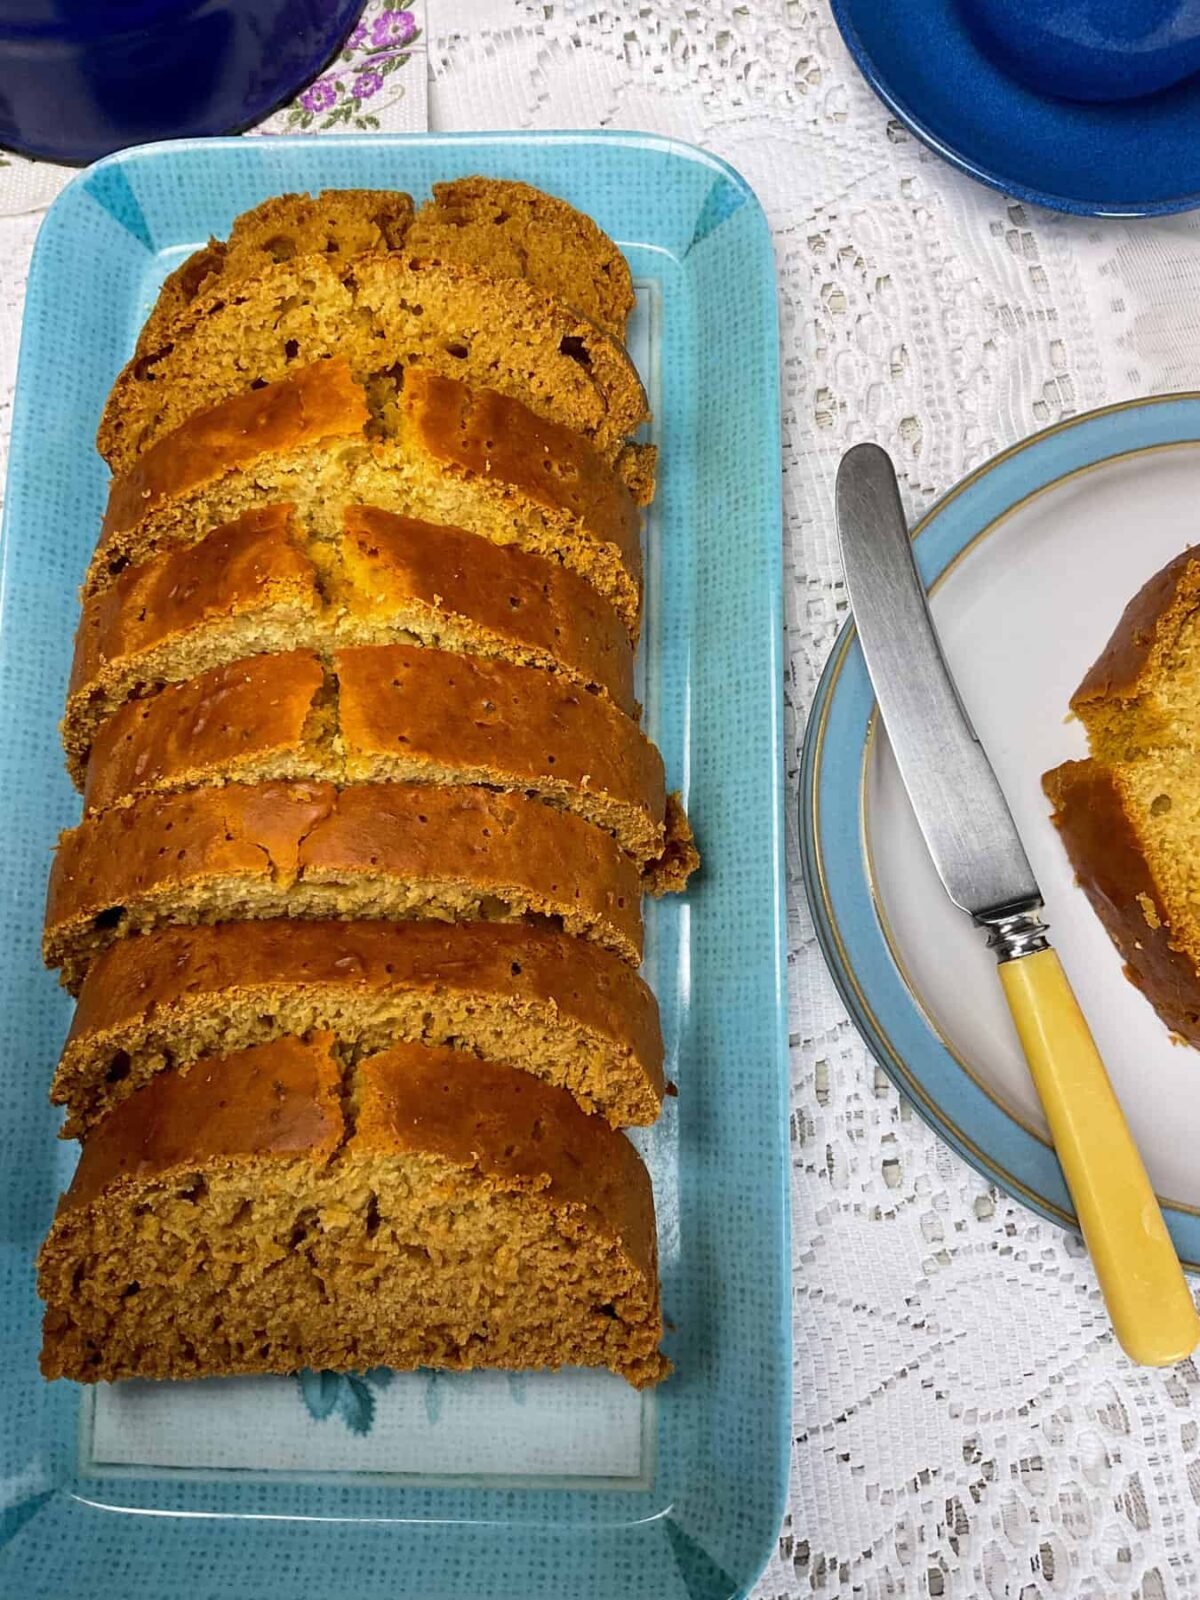 Golden syrup loaf baked and sliced, on a blue serving tray, blue rimmed plate to side with yellow handled butter knife, blue cups to side and a white net table cloth underneath.